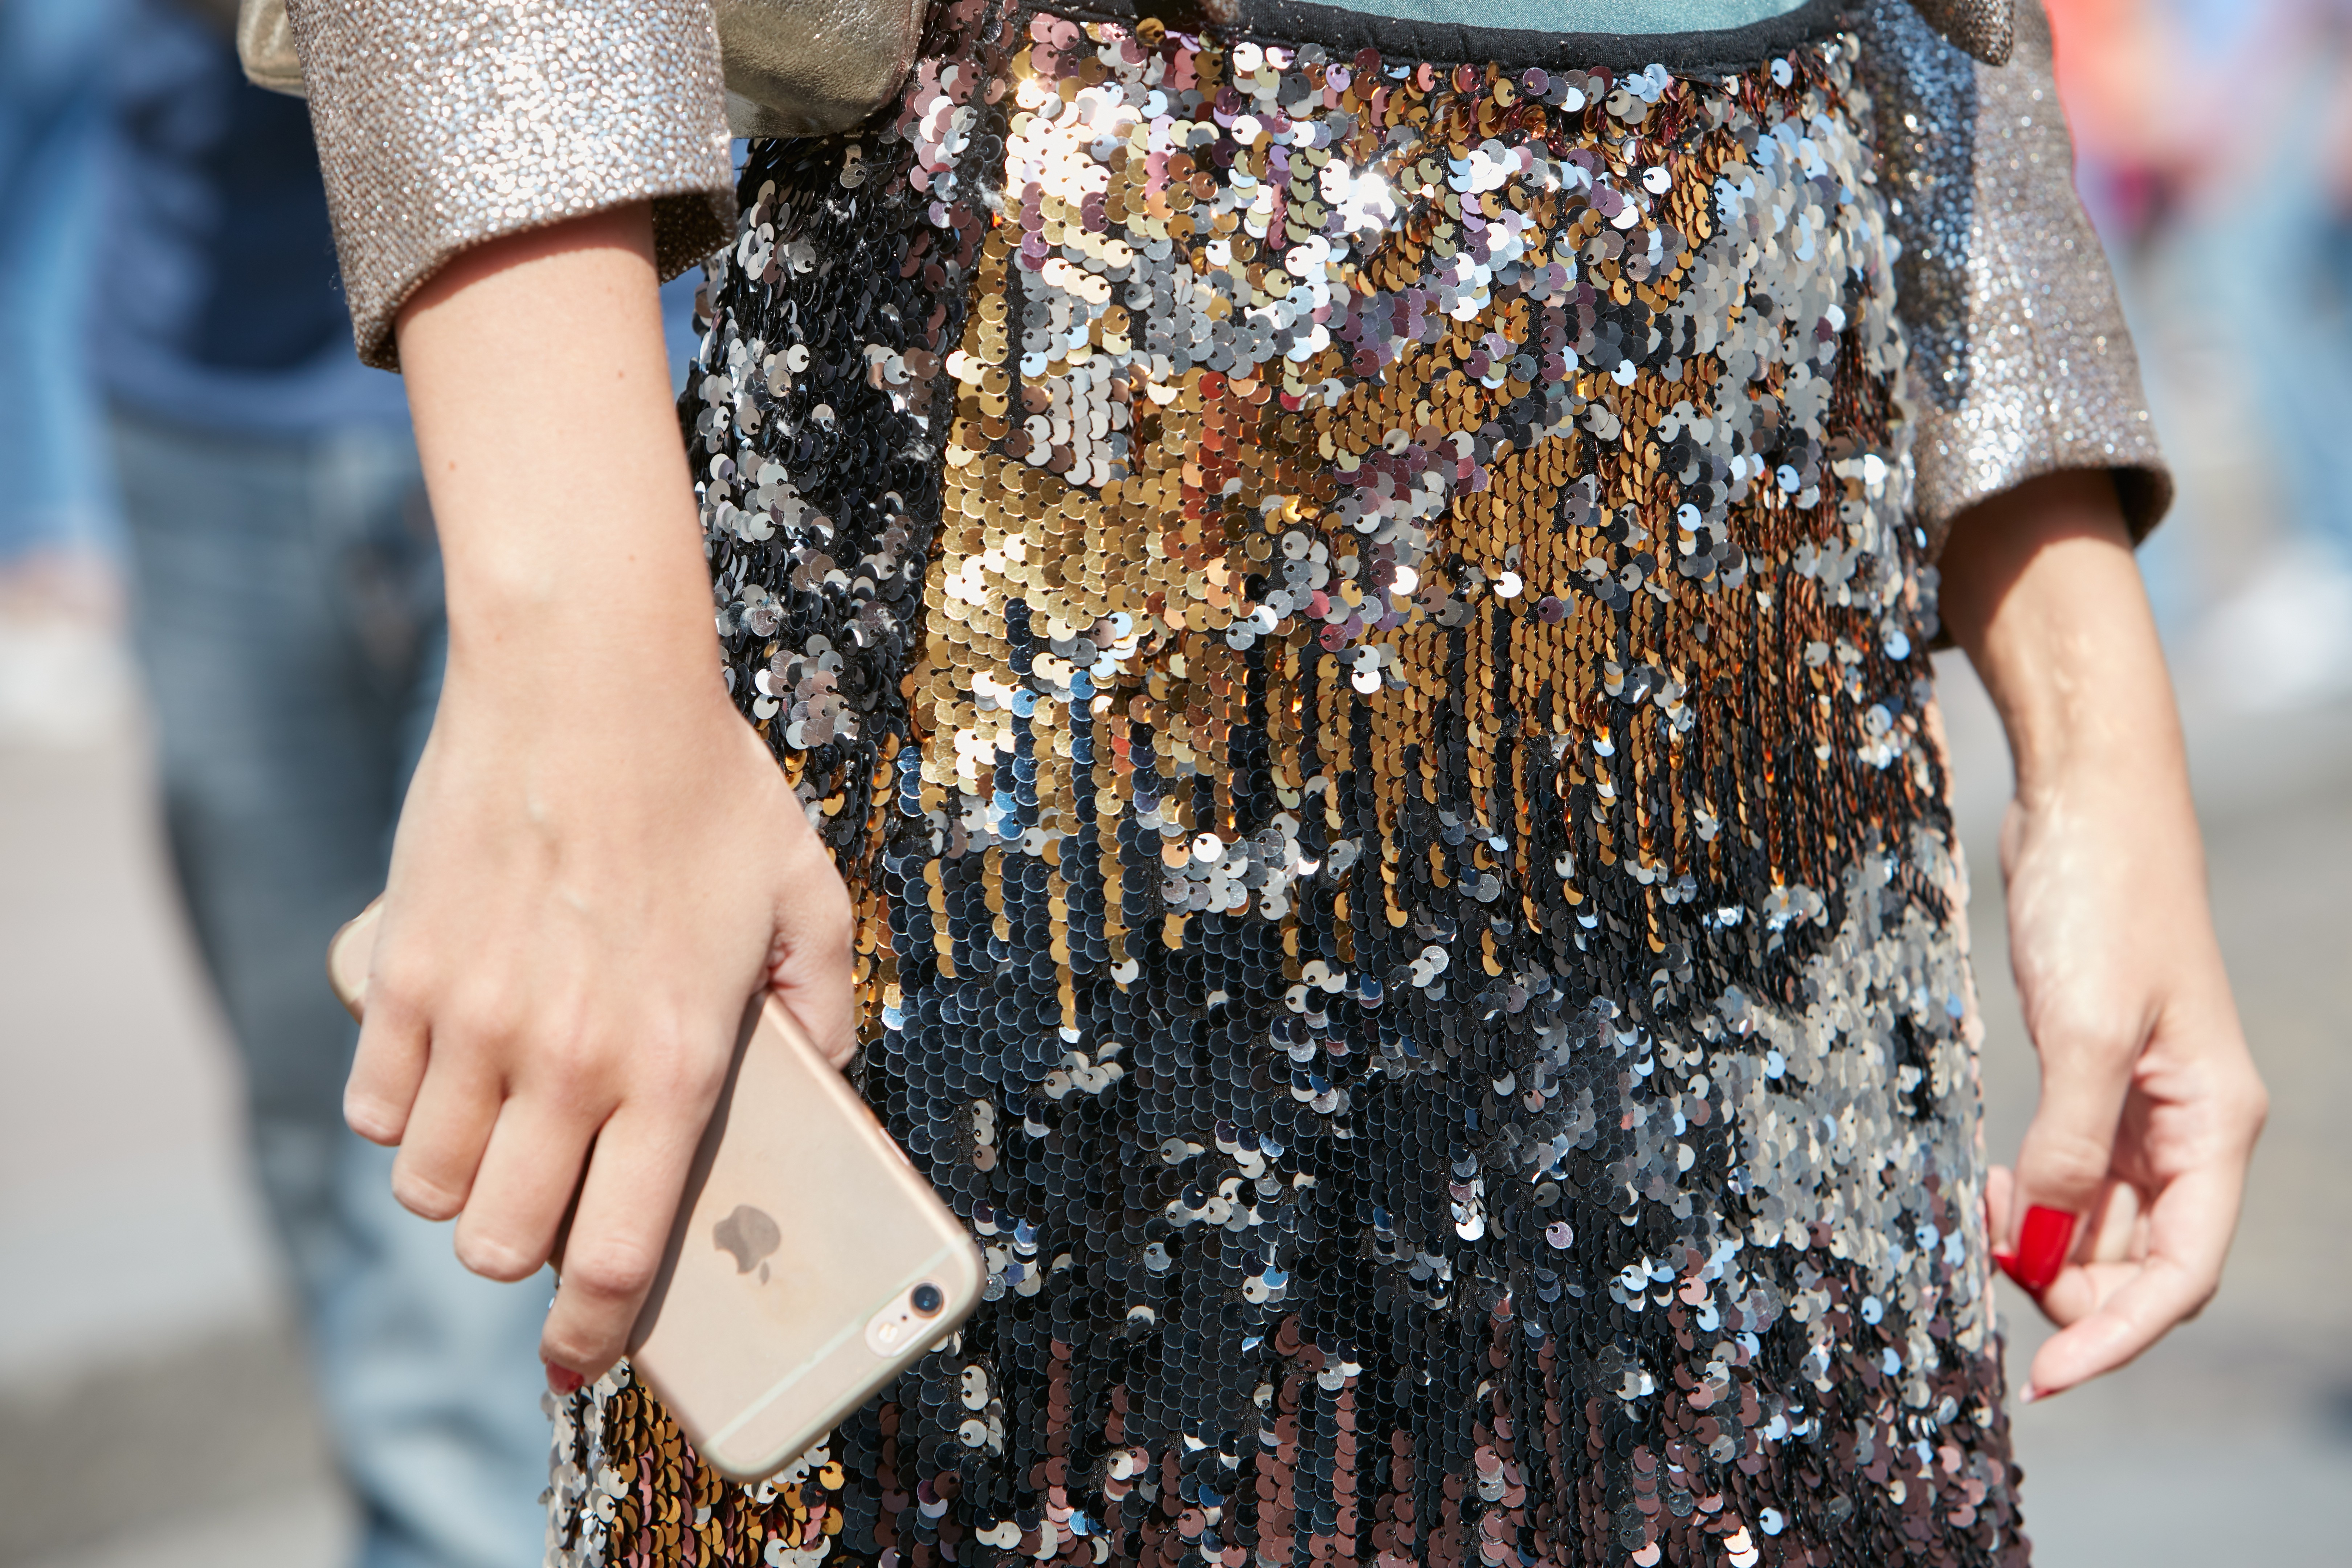 Shine on in a sequin skirt.